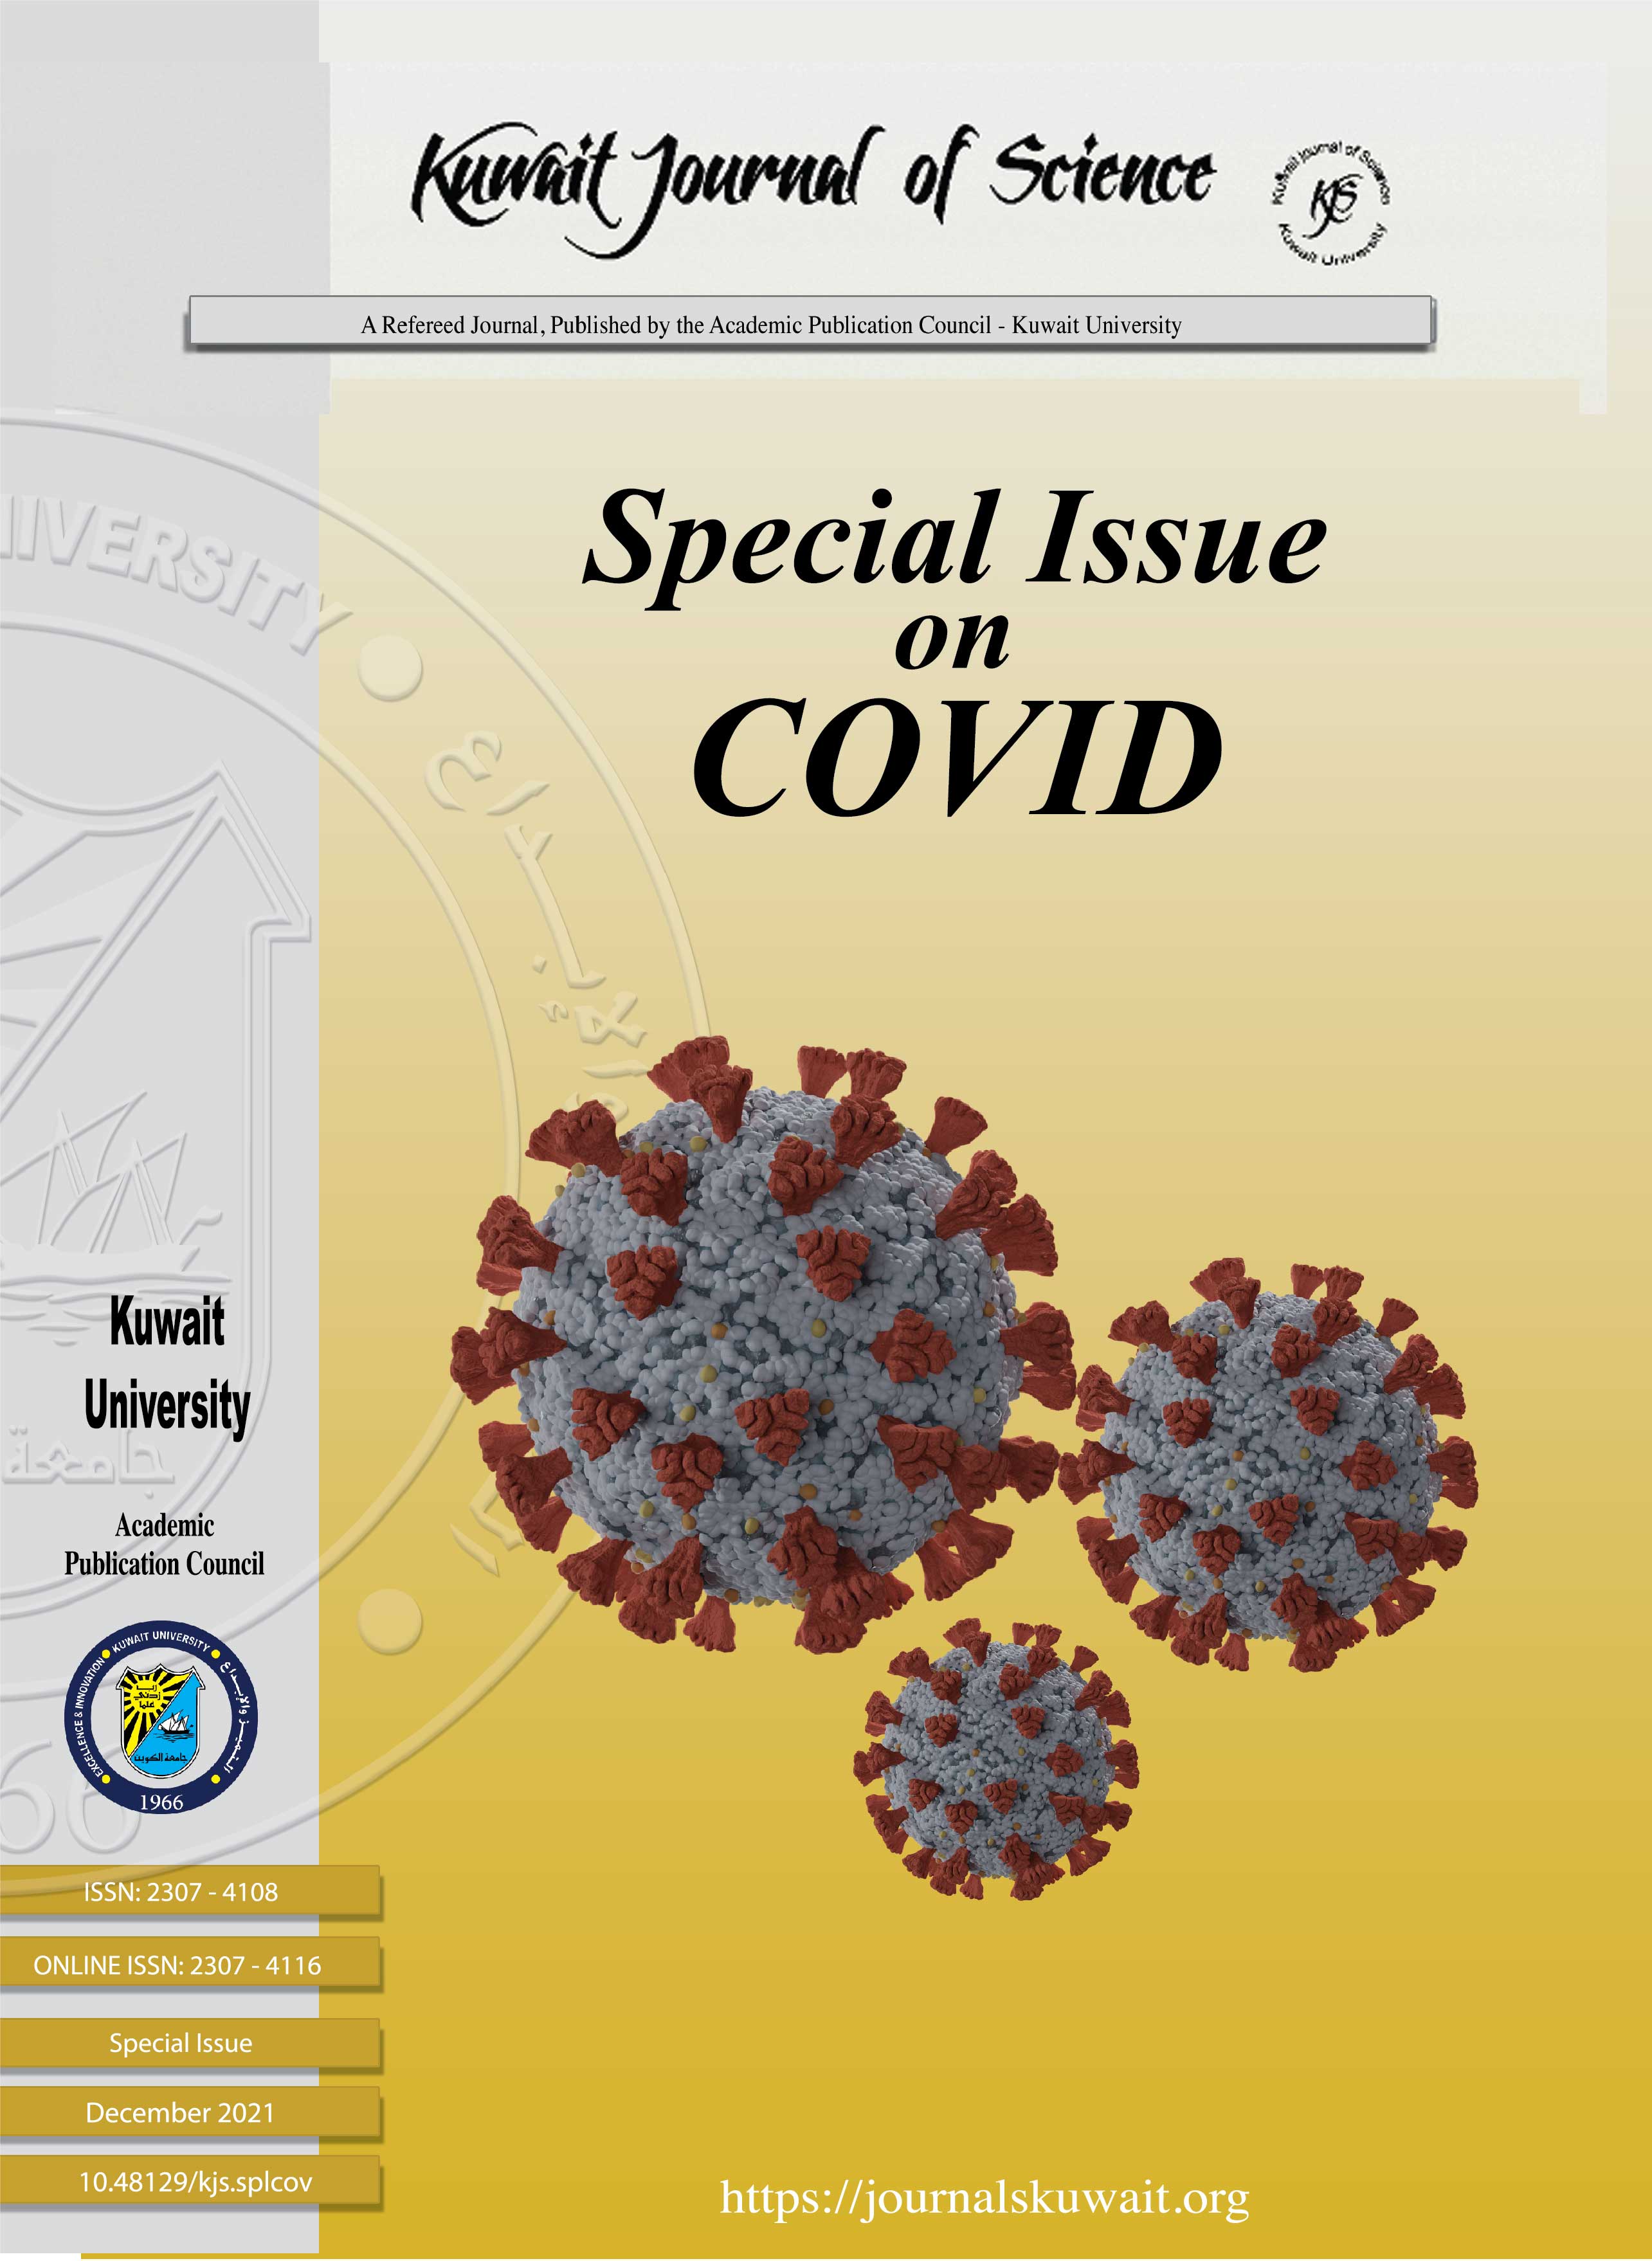 					View Special Issue on COVID
				